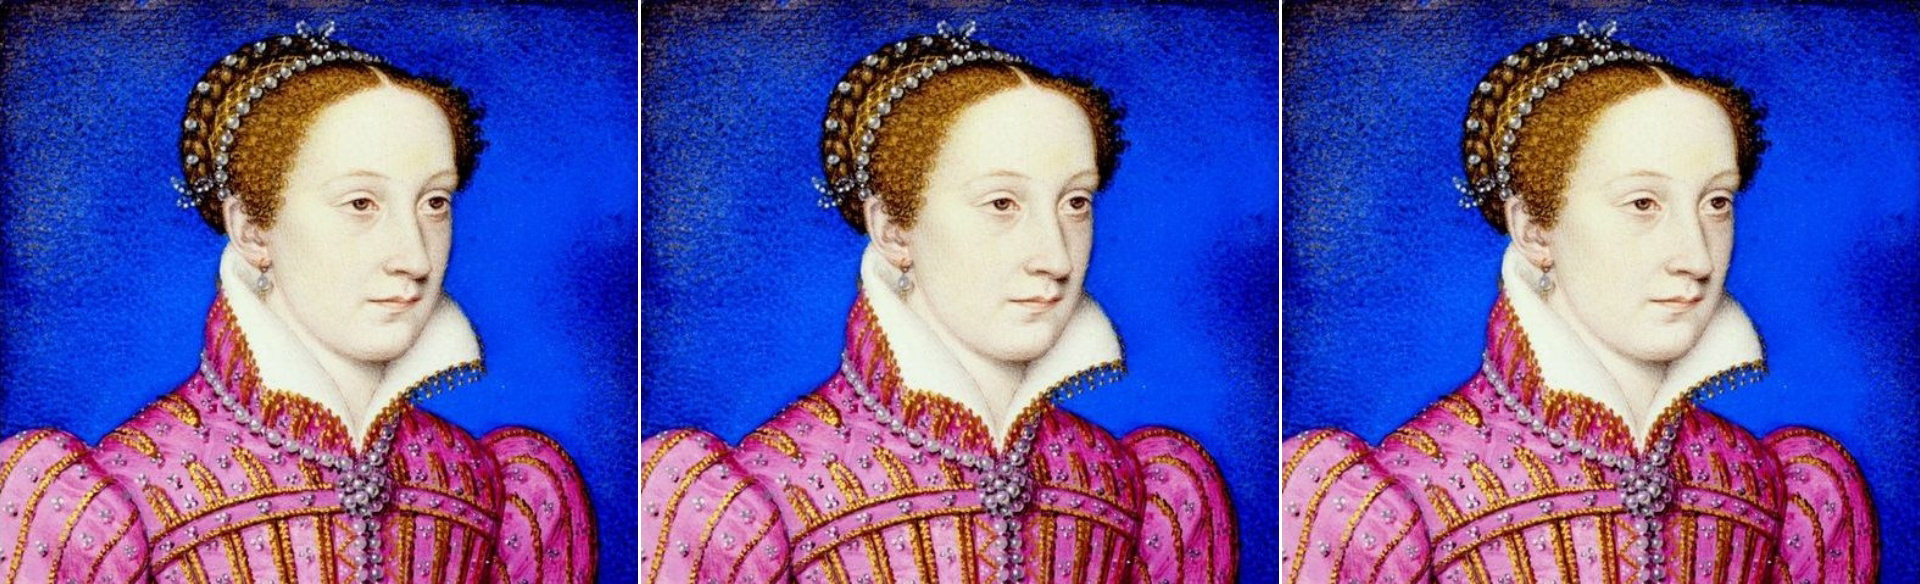 Mary, Queen Of Scots  Biography – Life, Reign, Death, Marriages